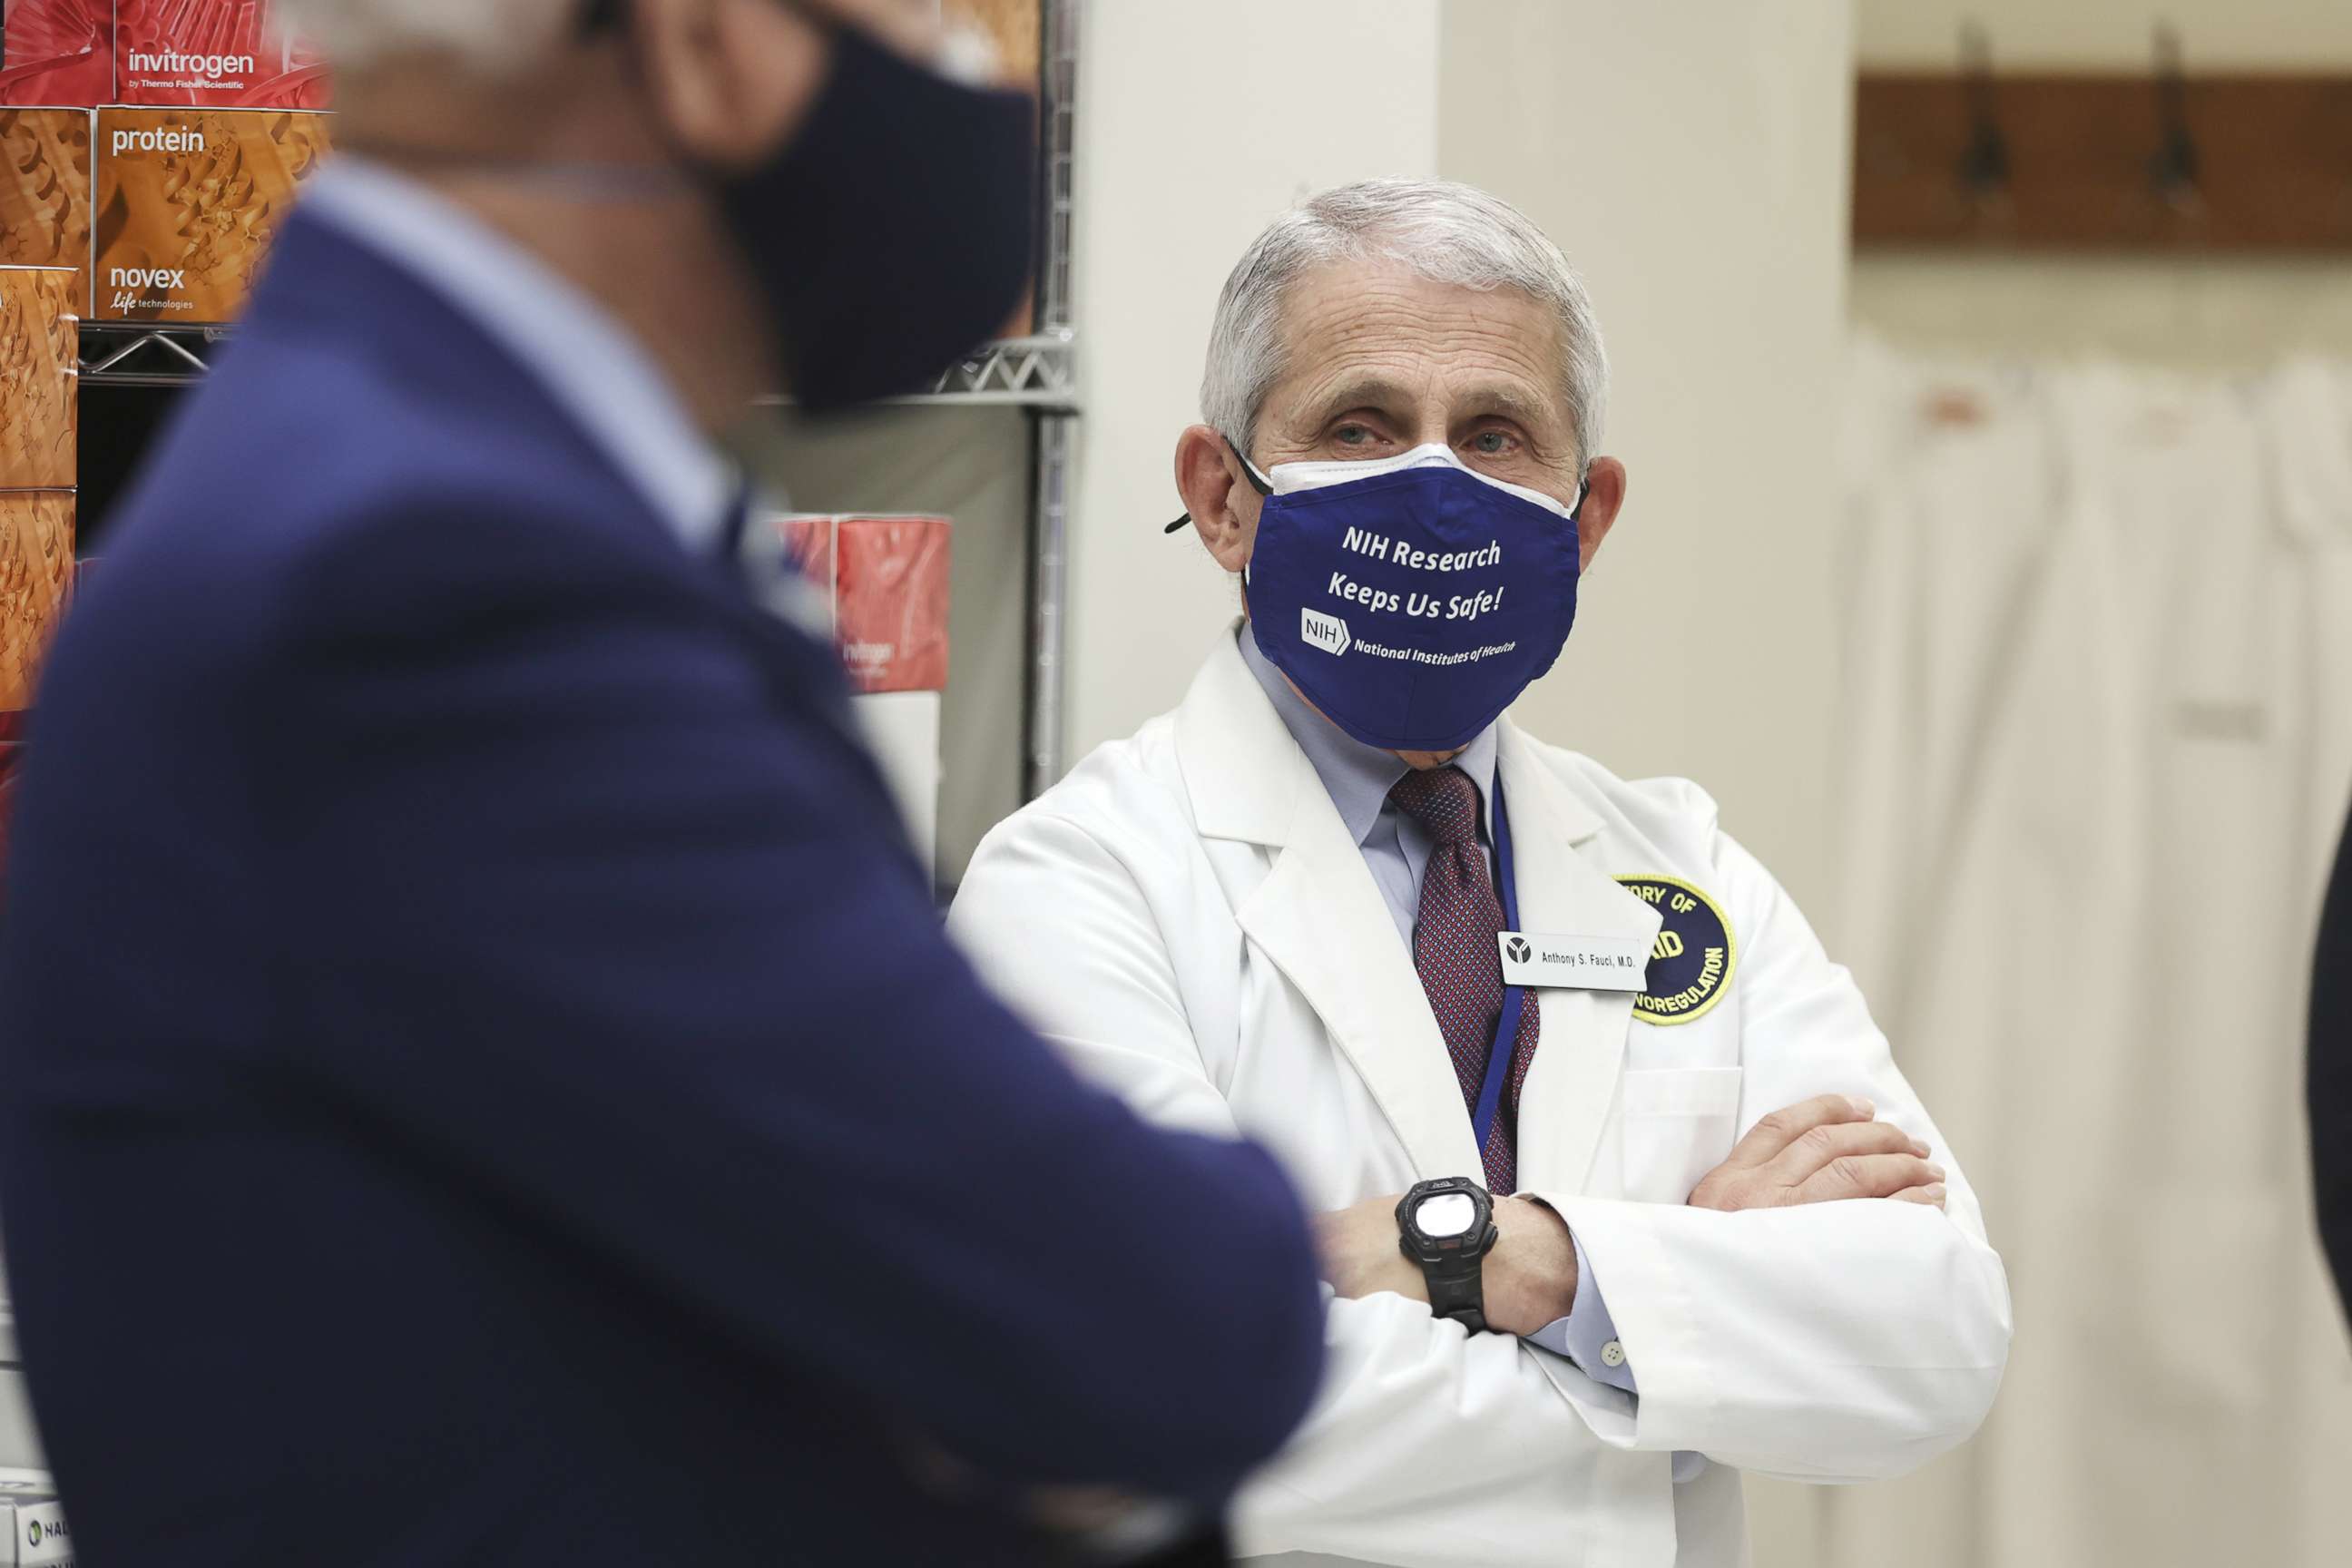 PHOTO: Anthony Fauci, director of the National Institute of Allergy and Infectious Diseases, wears a protective mask while listening to President Joe Biden, left, speak during a tour at the National Institutes of Health  in Bethesda, Md., Feb. 11, 2021.